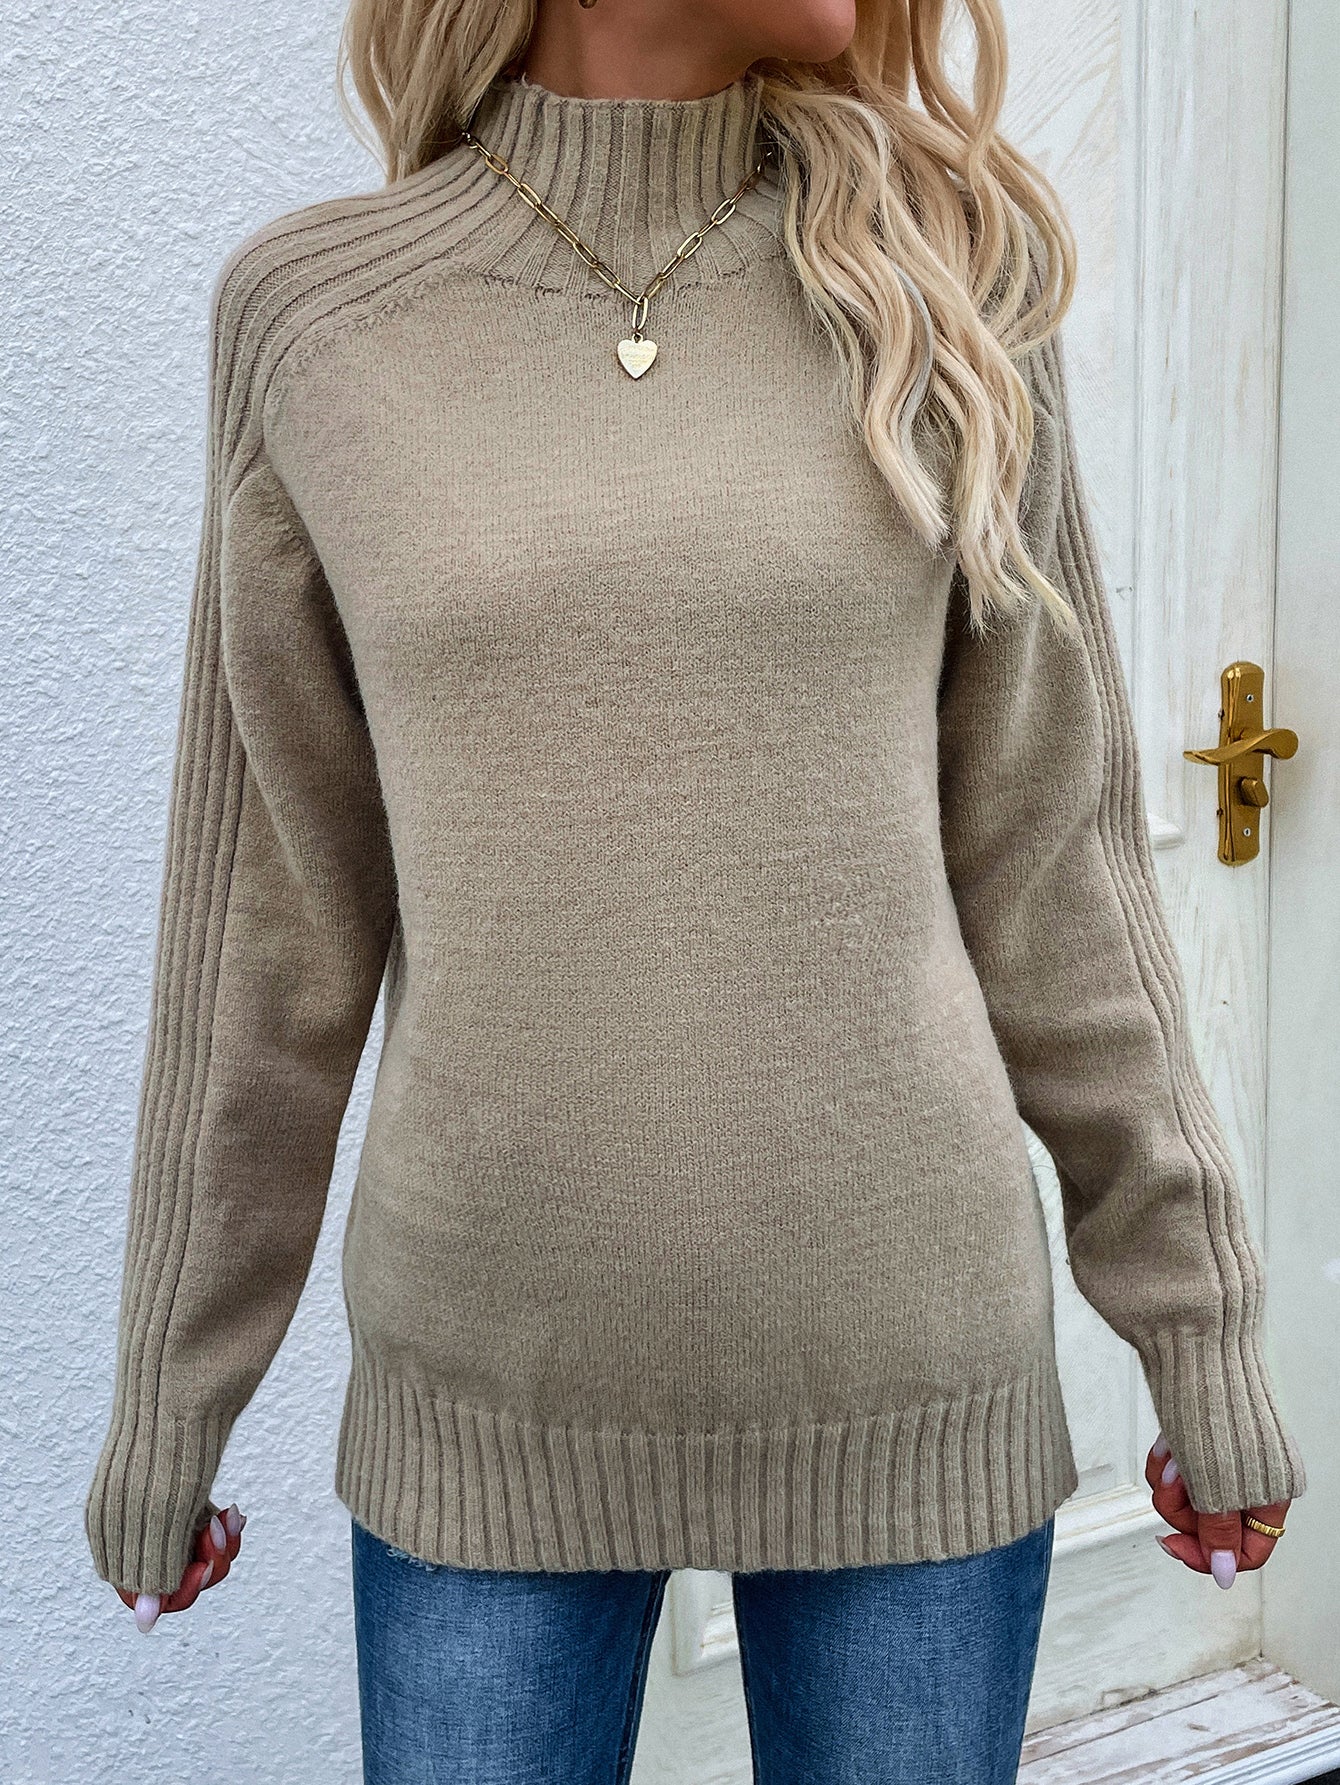 Autumn Winter New Solid Color Sweater Turtleneck Pullover Loose Women Clothing Solid Color Autumn Winter Turtleneck Sweater